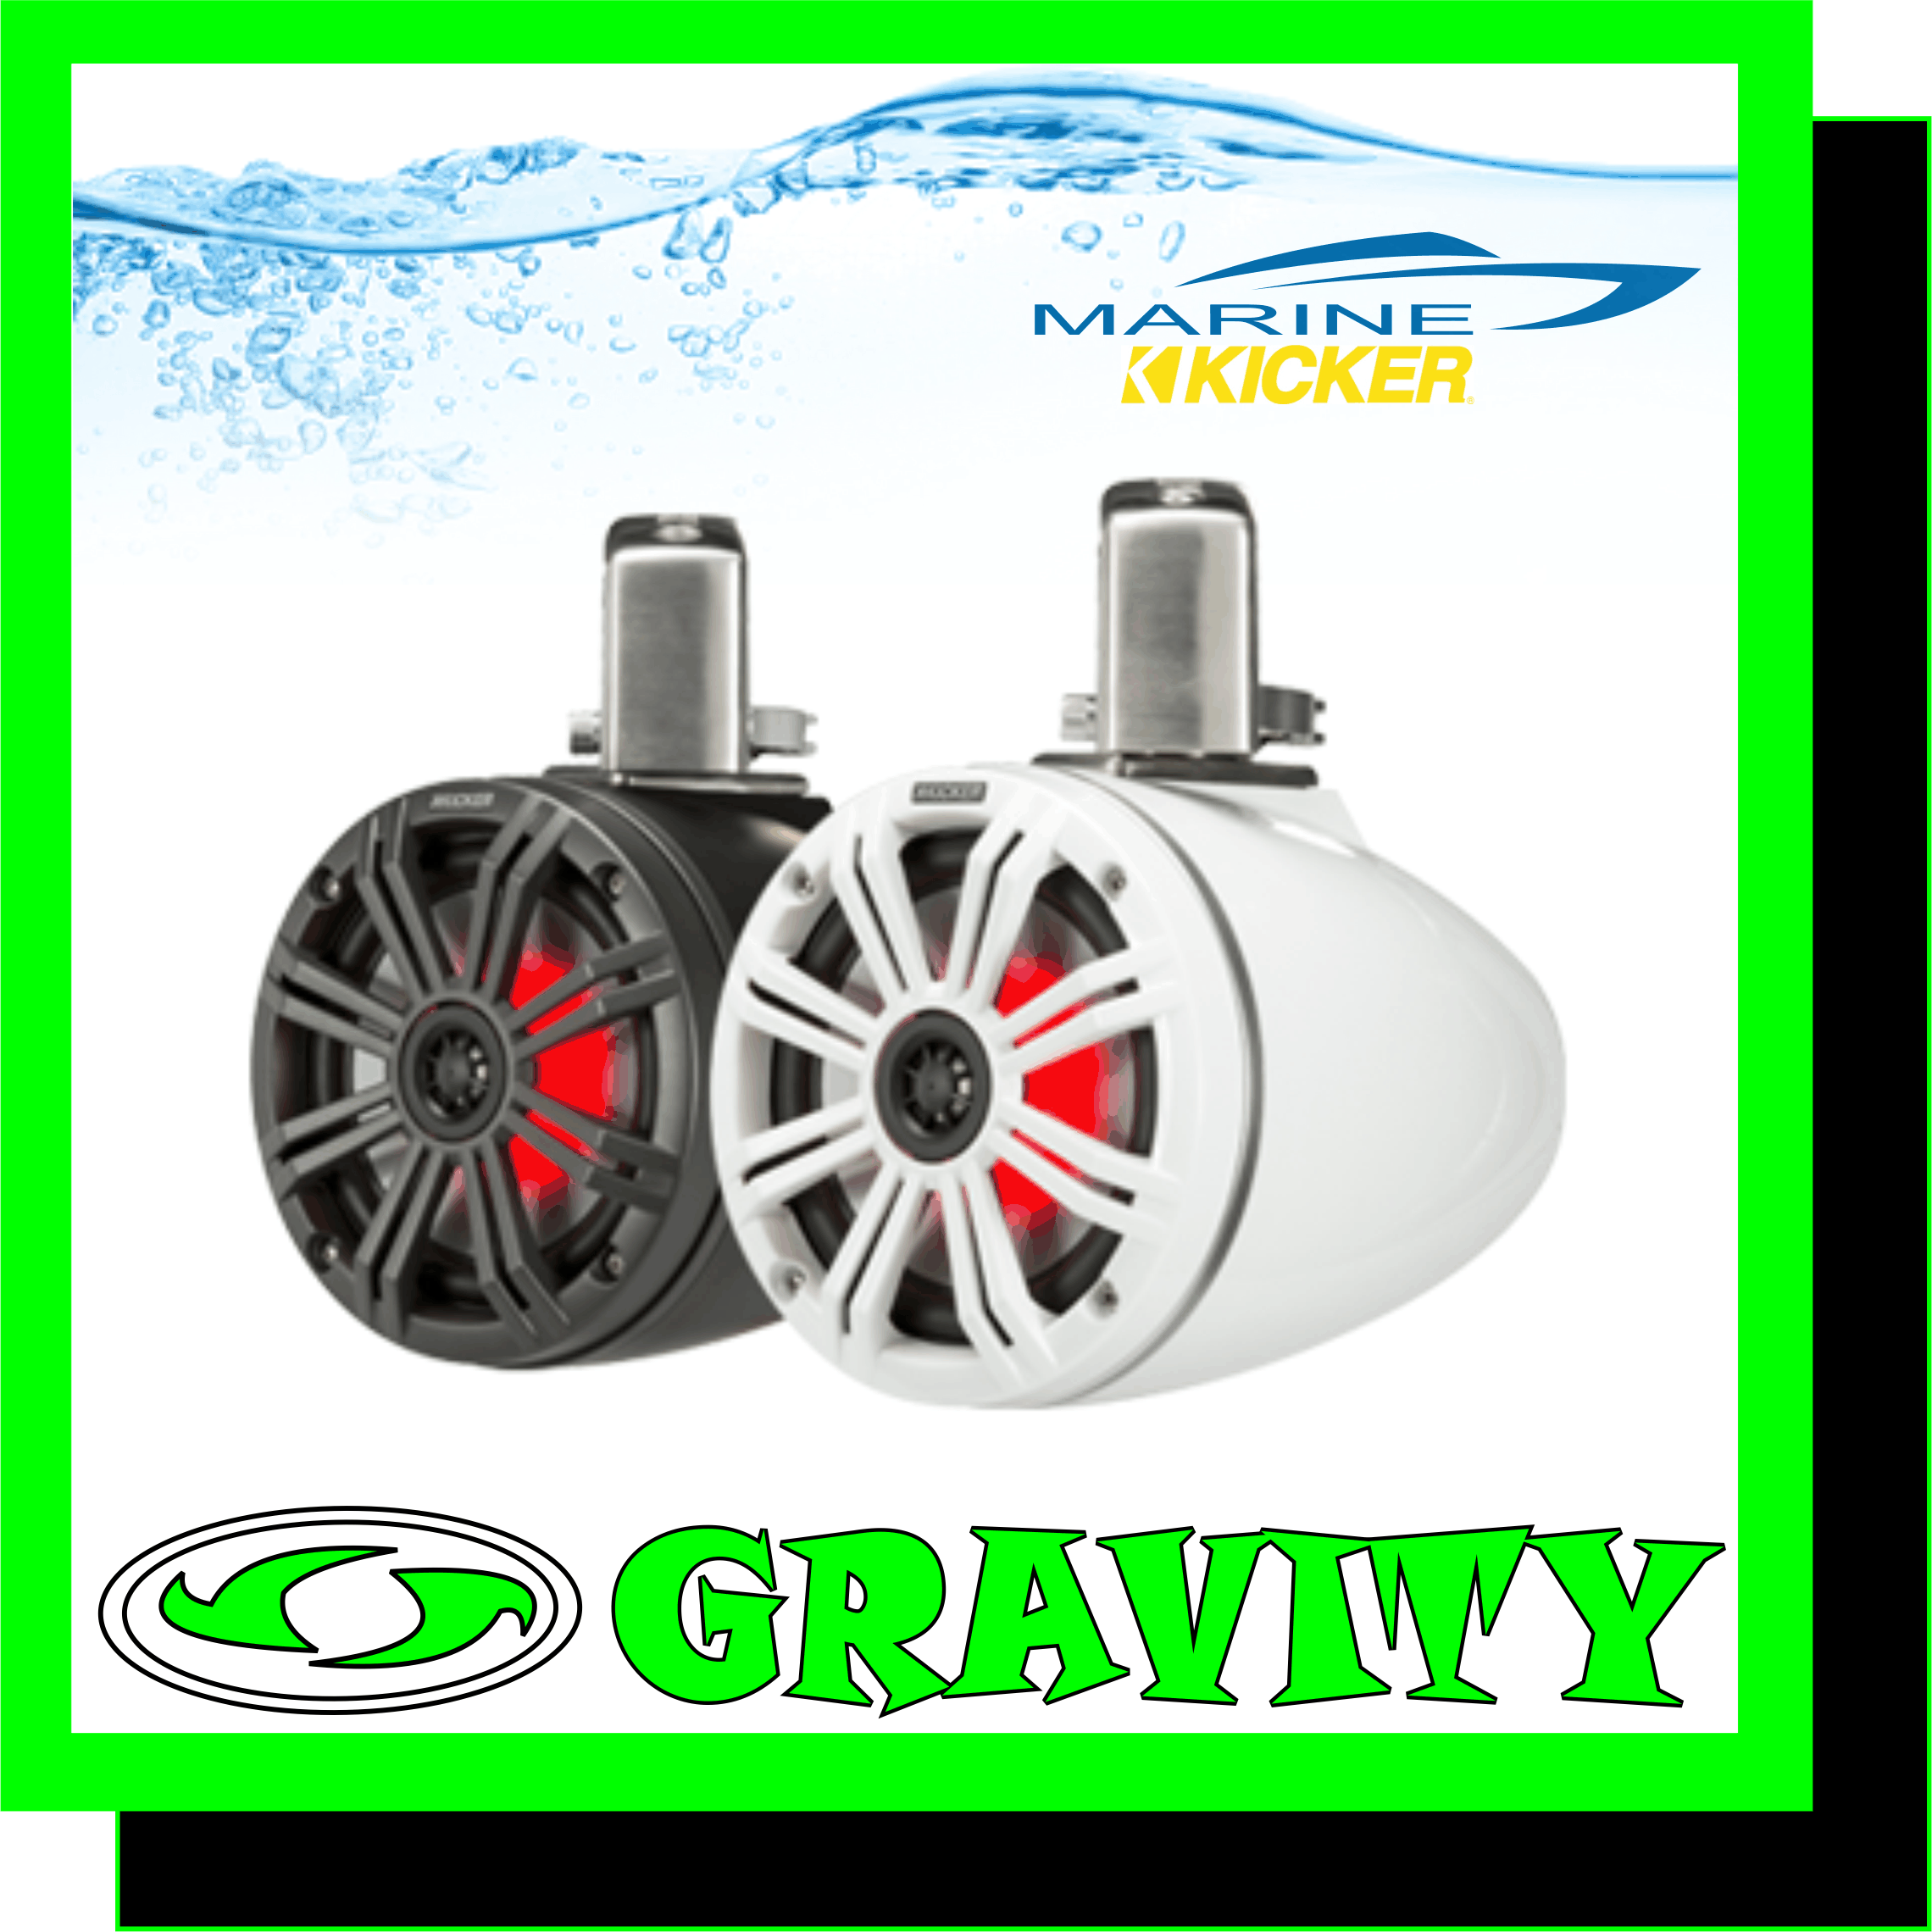 Kicker KMTC65 (165mm) Loaded Marine Cans with 45KM654L Speakers pair Charcoal or Black  Product highlights: 6-1/2? marine wakeboard tower speakers (pair) UV-treated polypropylene woofer with Santoprene rubber surround 3/4? balanced dome titanium tweeter built-in LED lighting with 20 color options and 19 dynamic modes 359� swiveling clamp system optional KMLC remote controls all lighting functions available in White or Charcoal/Black sealed motor structure and locking terminal covers stainless steel mounting hardware included UV-resistant polymer basket  SPECS: handles up to 65 watts RMS (195 watts peak power) frequency response: 35-21,000 Hz sensitivity: 90 dB impedance: 4 ohms dimensions: 7? x 9-11/16? D x 10-11/16? H (w/bracket) Specifications:  Kicker KMTC65 (165mm) Loaded Marine Cans with 45KM654L Speakers pair; Charcoal/White  Woofer (in, cm) 6-1/2, 16 Tweeter (in, cm) 3/4, 2 Tweeter Dome Material Titanium Rated Impedance (ohms) 4 Peak Power Handling (Watts) 195 Continuous Power Handling (Watts RMS) 65 Sensitivity (1W, 1m) 90 Frequency Response (Hz) 35-21k Height incl. bracket (in, cm) 10-11/16, 27.1 Height from roll bar (in, cm) 8-1/4, 22.8 Diameter (in, cm) 7, 17.7 Depth (in, cm) 9-11/16, 24.5 LED Lighting Yes What?s in the Box: 2 ? full-range speaker enclosures mounting hardware   Kicker KMTC65 (165mm) Loaded Marine Cans with 45KM654L Speakers pair; Charcoal/White Livin? Loud and looking good, KICKER KMTC65 Coaxial Tower Systems are the flexible, stylish solution your boat needs . Sold as pairs. ? Four-Ohm Voice Coil ? 3/4-Inch Titanium Tweeter ? UV-Treated Polypropylene Woofer With Santoprene� Surround ? 359� Swivel With Toolless Locking Cam/Toggle System ? Stainless Steel/ABS Clamp Fits 1.5 - 3.25-Inch Tubing ? UV-Resistant Polymer Basket ? Through-Clamp Wiring System ? 316L Stainless Mounting Hardware Included ? Grille With Seven-Color LED System Included* ? Meets or Exceeds ASTM Standards for UV** and Salt/Fog Exposure***    Add these 6-1/2? speakers to your tower Kicker?s 45KMTC65 marine tower speakers are an amazing combination of awesome sound and cool lighting. Like all Kicker speakers, they sound terrific, but with built-in LED lighting and aggressive styling, these speakers bring a lot more to the party. You can adjust the multi-color LEDs to suit your boat or your mood, so they?ll add a lot to your evening cruise. Available in classic White or a Charcoal/Black combo, these 6-1/2? speakers will look great in any boat.  Get the lighting look you want You can access twenty color options as well as 19 dynamic modes using the optional Kicker KMLC remote. The KMLC gives you multi-function control of the LED lighting by managing color and dynamic mode functions, including adjustable brightness, fade, speed/strobe, and auto save. Whether you?re on fresh water or salt, these speakers will give you years of audio and visual enjoyment.  Point your sound where you want it These rugged wakeboard tower speakers are tough enough for marine duty, but they?re very easy on the ears. The durable 6-1/2? poly woofers and balanced dome titanium tweeters cut through wind, waves, and engine roar to deliver big-time sound without annoying harshness. The swiveling clamp system is easy to install and lets you rotate the speakers to suit your situation, Point them aft for waterskiiing or wakeboarding, or spin them in to enjoy your music when you?re anchored out. Whatever you?re doing, these Kickers will make your day on the water just a little bit better than it was already.  Built for boating and built to last Designed for life on the water, these powerful 4-ohm speakers feature sealed motors, rubber cone surrounds, and locking terminal covers to keep spray away from the internal componentry. They?ll also stand up to harsh sunlight, thanks to special UV treatments on the cones, surrounds, baskets, and grilles. The durable stainless steel/ABS clamps will fit tubing from 1-1/2? to 3-1/4?, so these speakers will work on a wide variety of vessels.